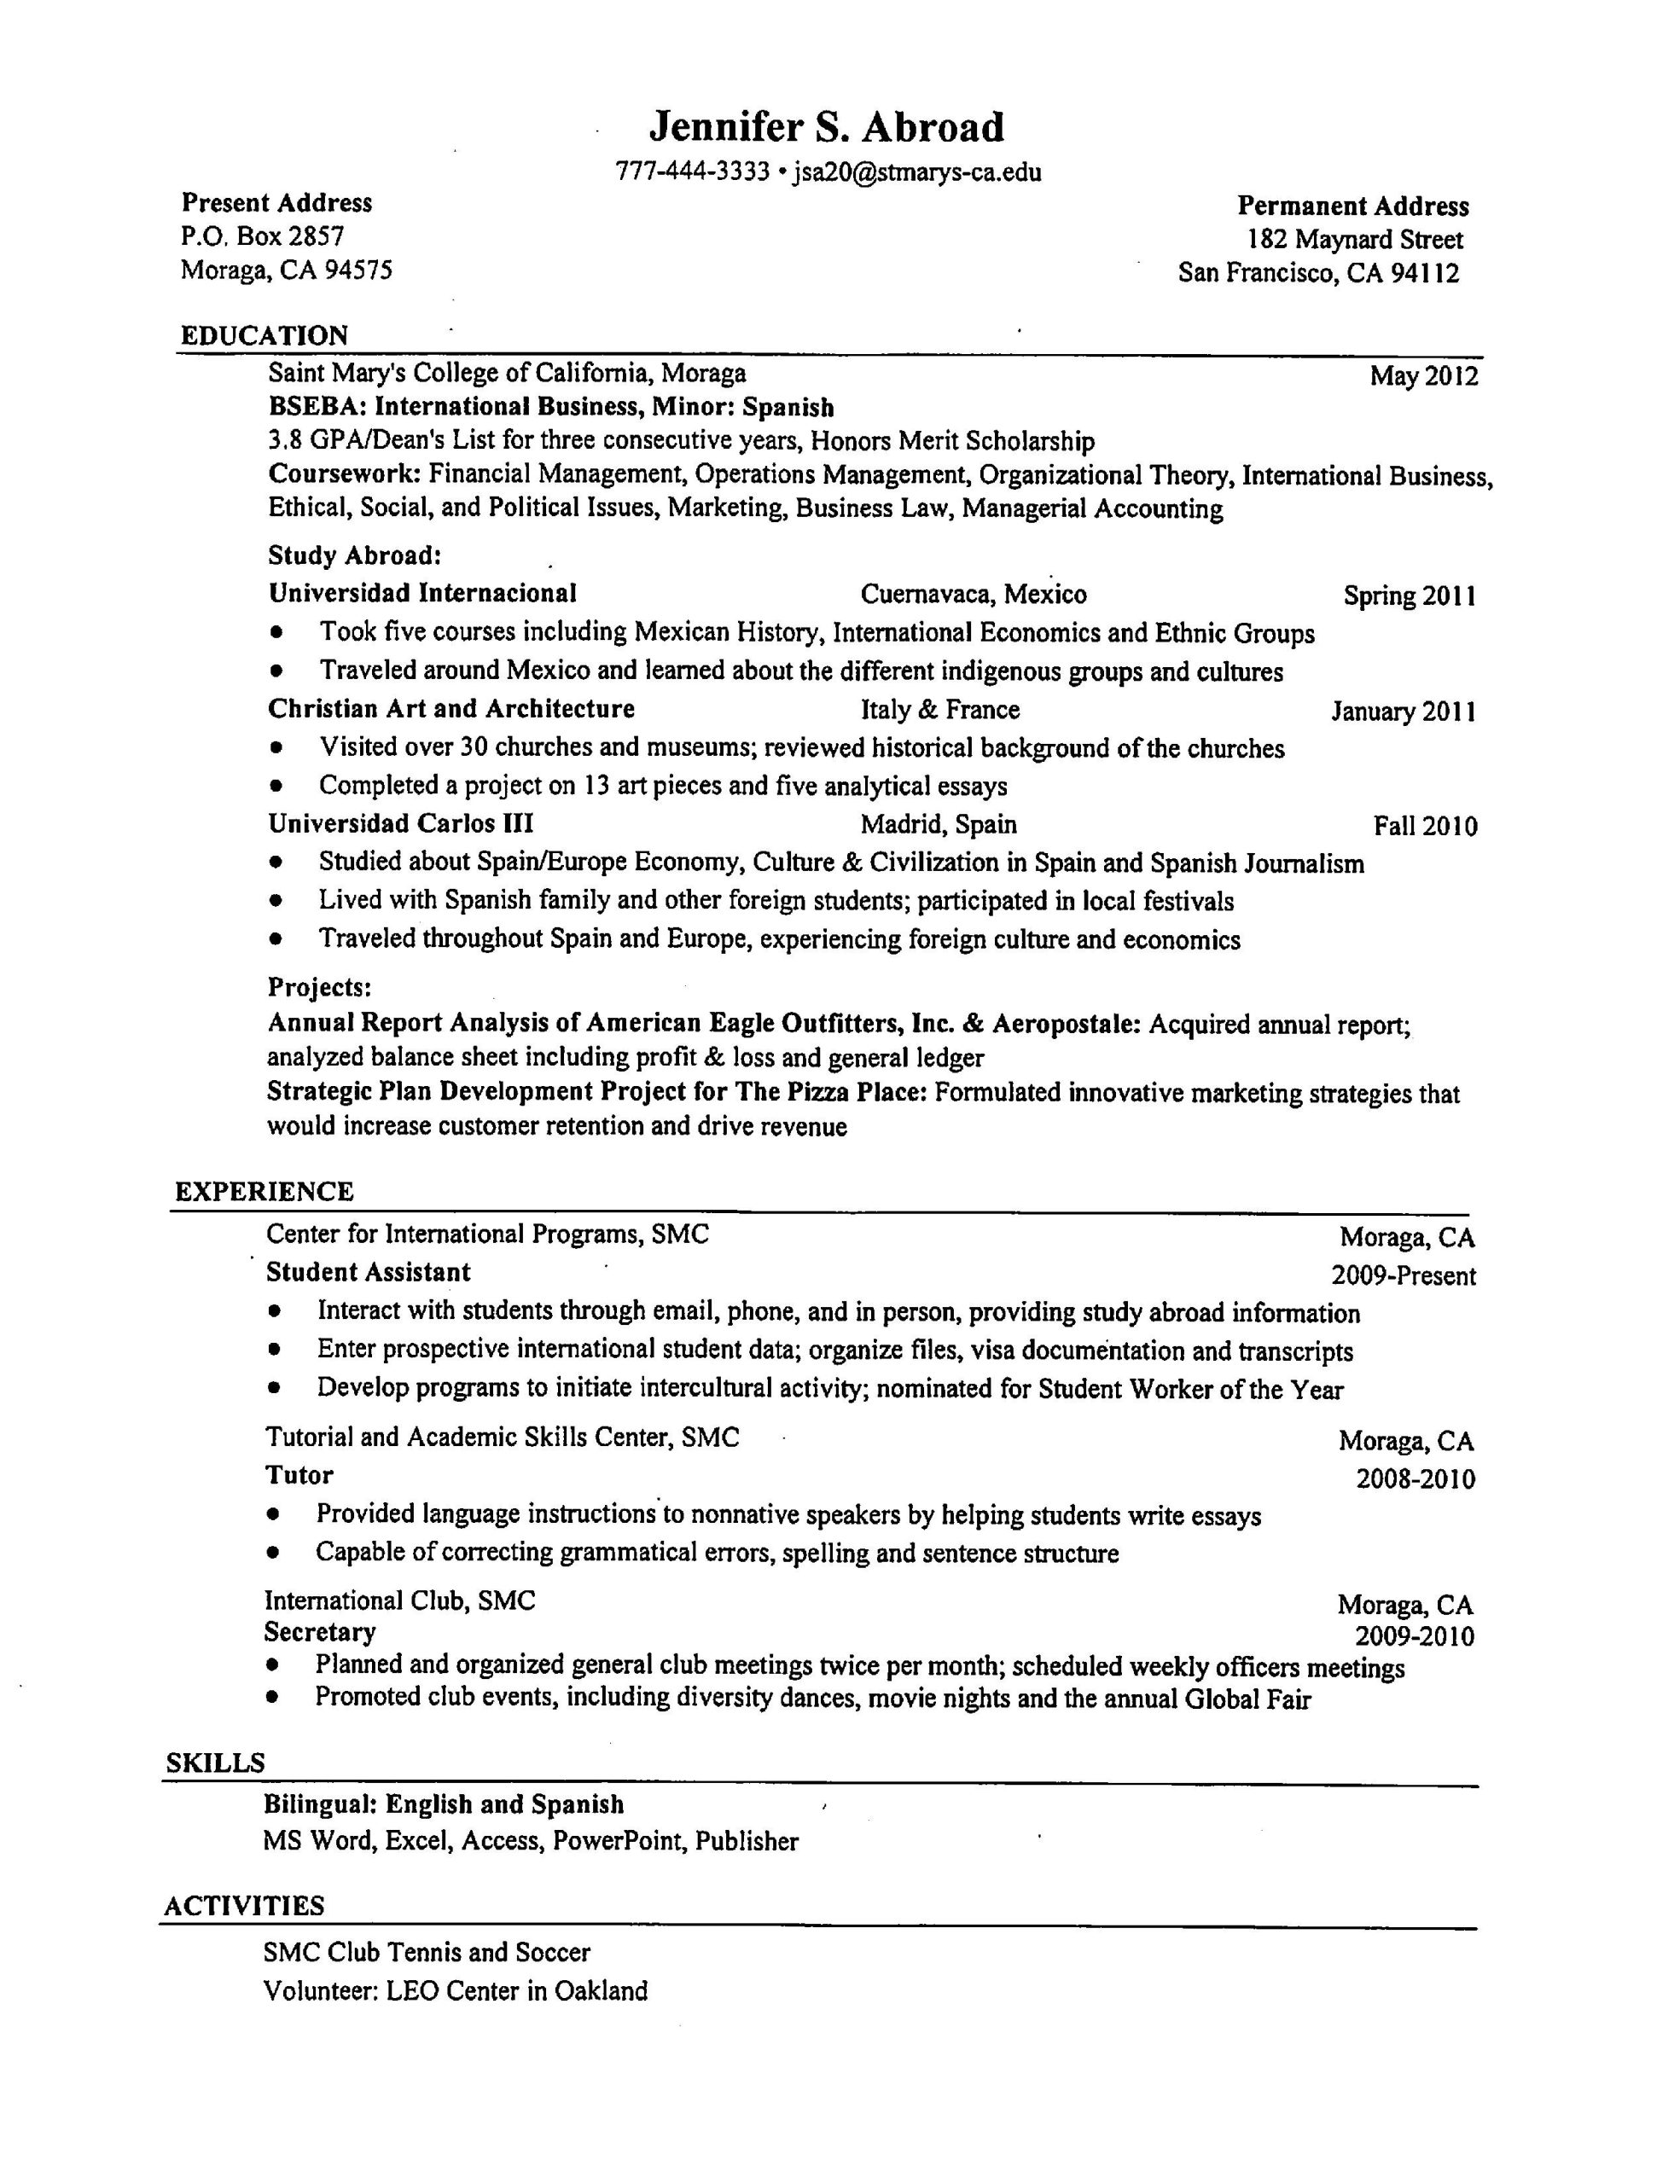 Go to Guy Bilingual Resume Sample Resume Tips Saint Mary’s College